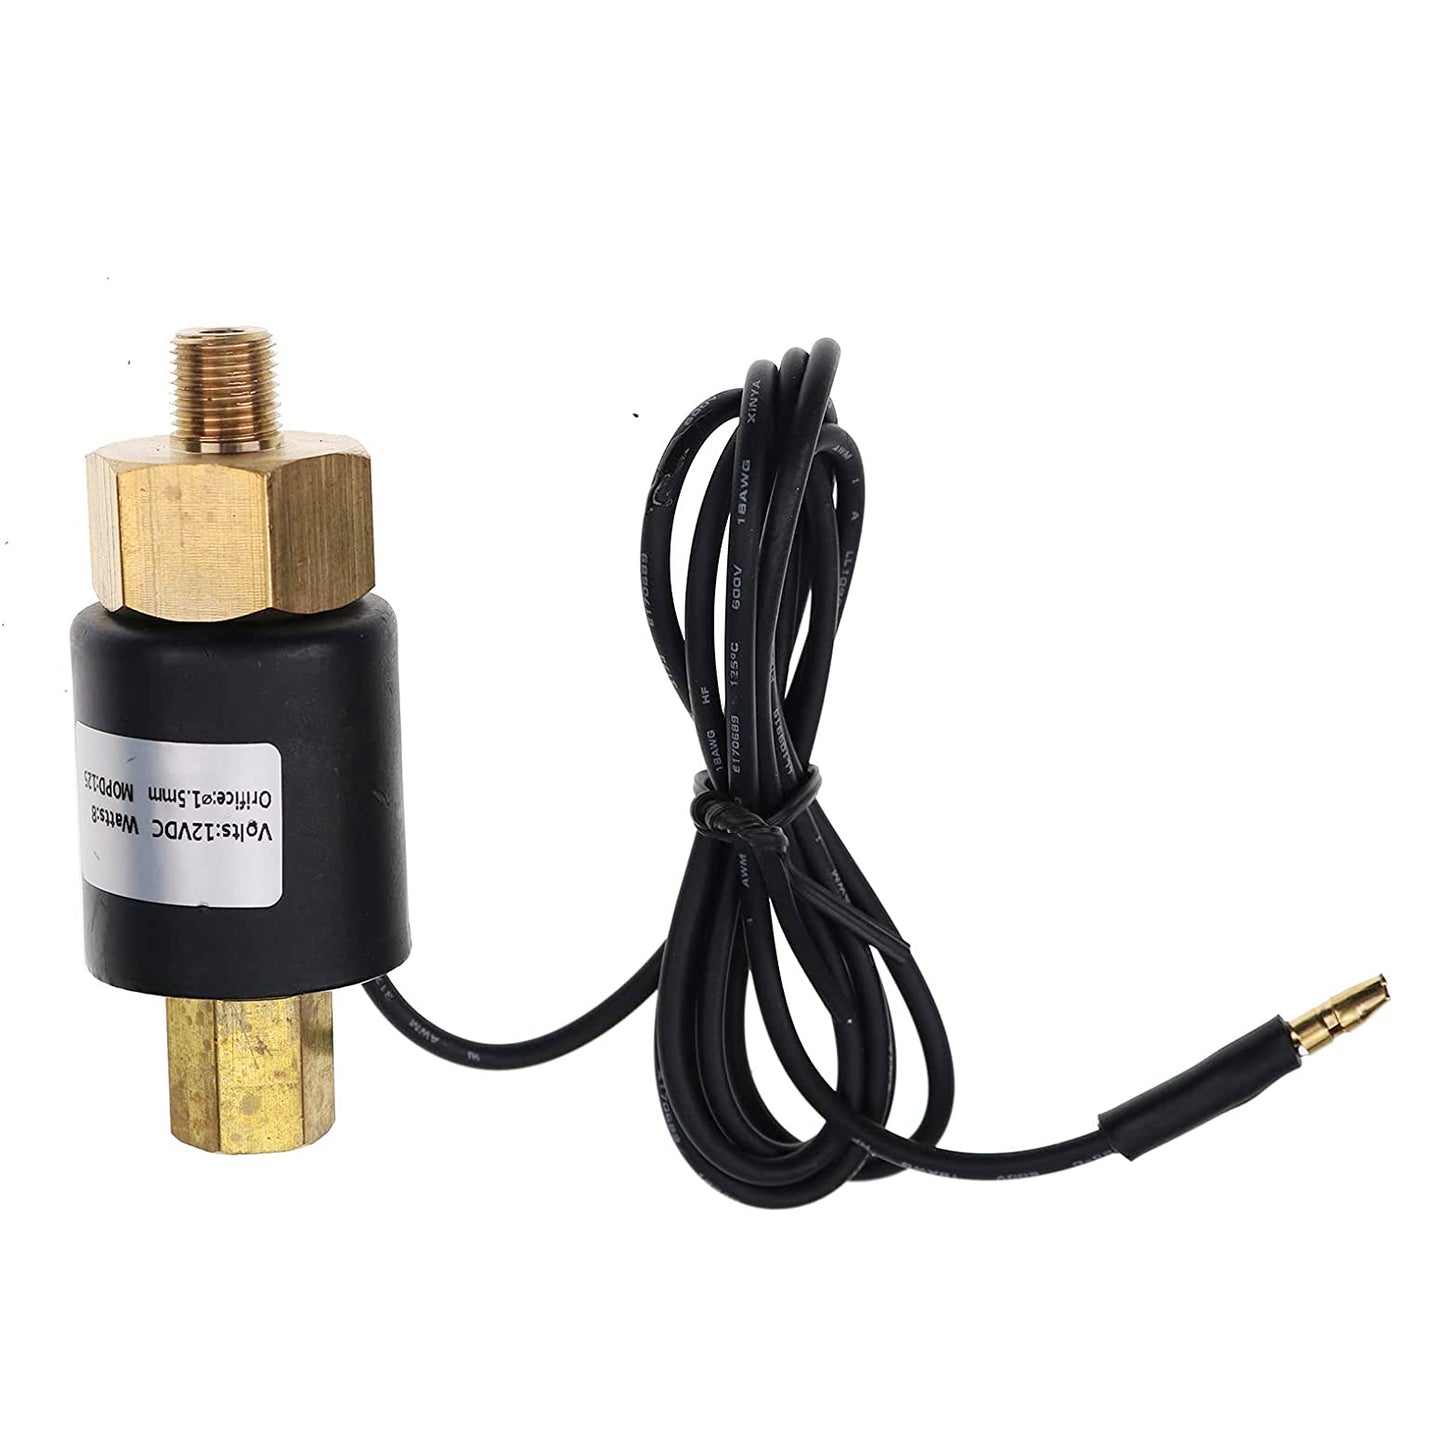 New Disc Brake Solenoid XF-205A Compatible with Dexter Tie Down Engineering Brake Actuator